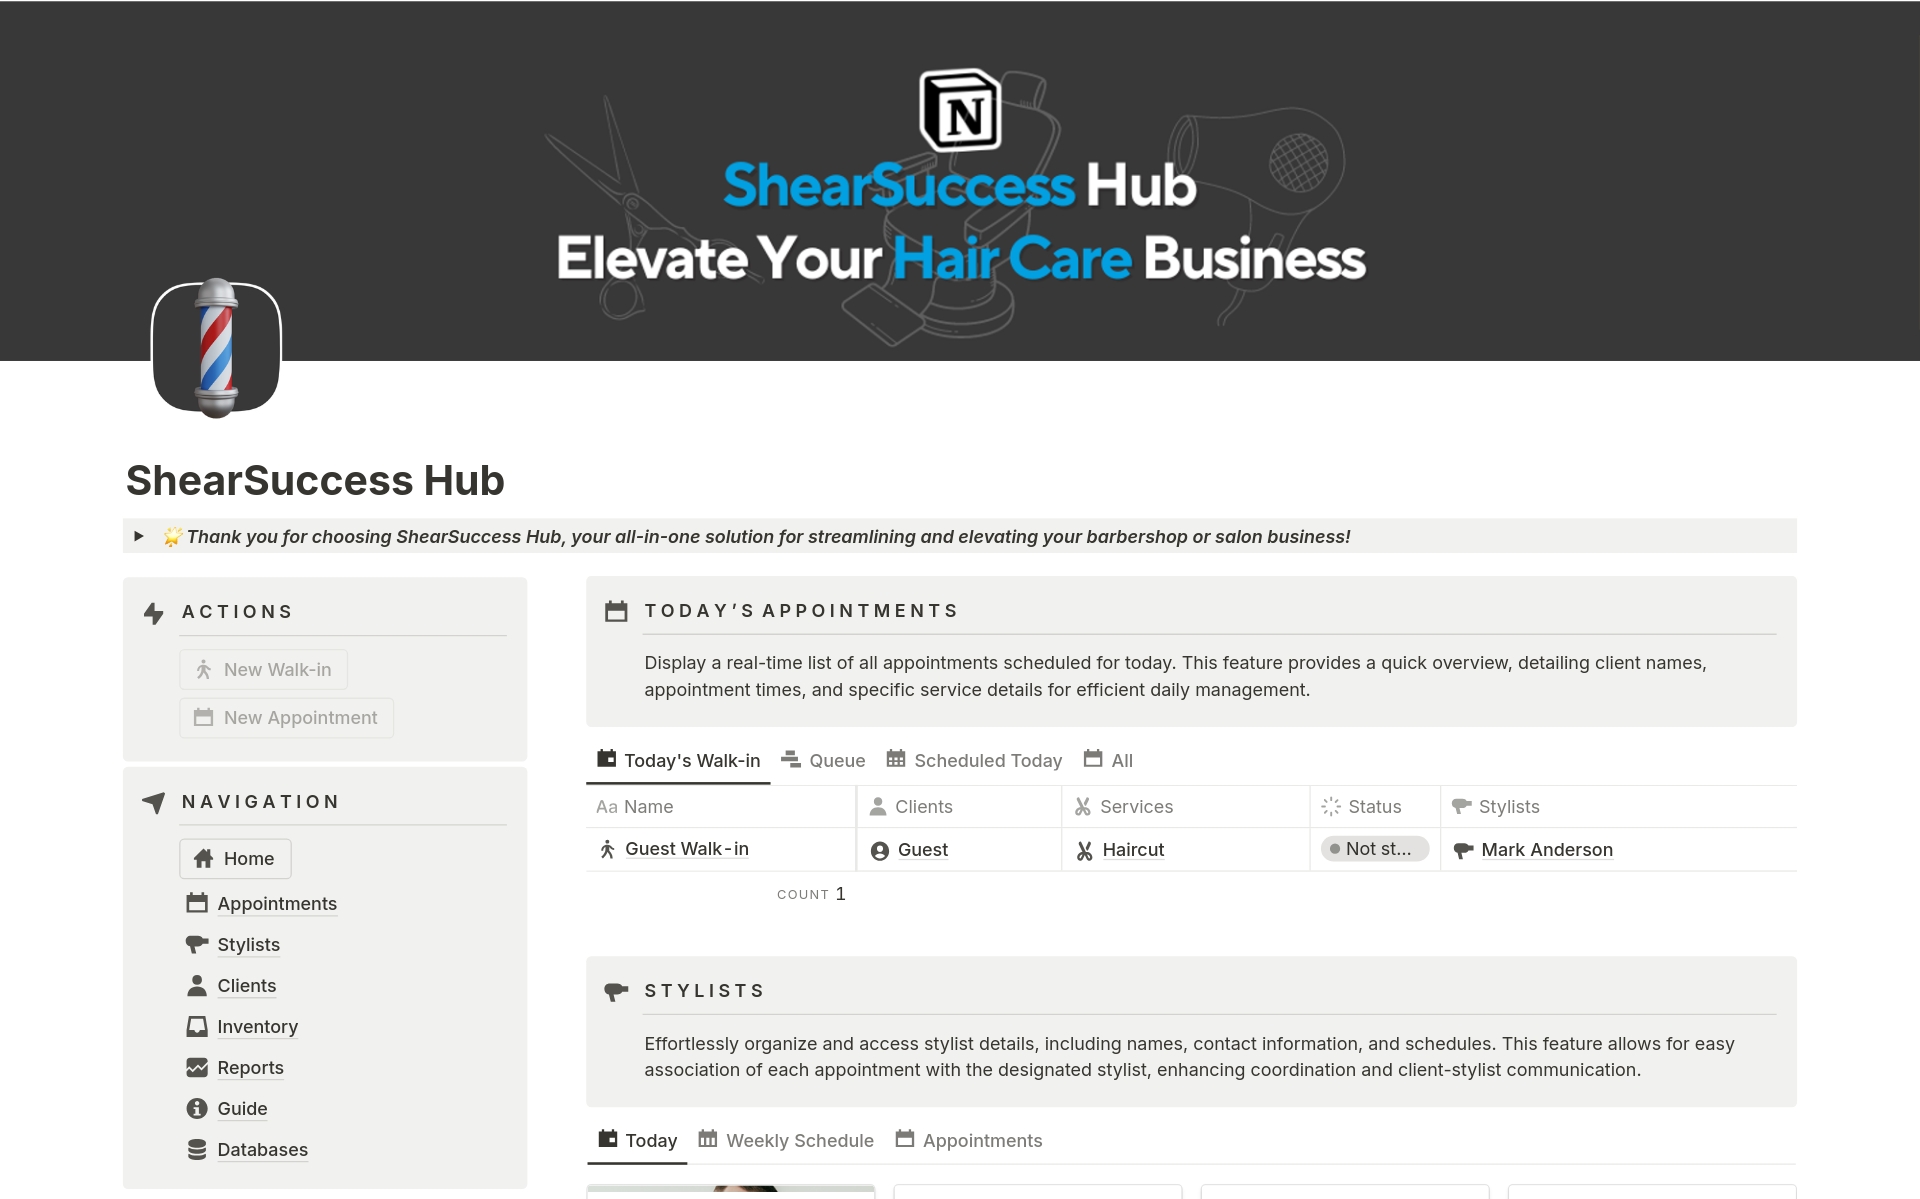 All-in-one Notion template designed to revolutionize the way you manage appointments, track inventory, and gain valuable insights into your Barbershop or Salon operations.